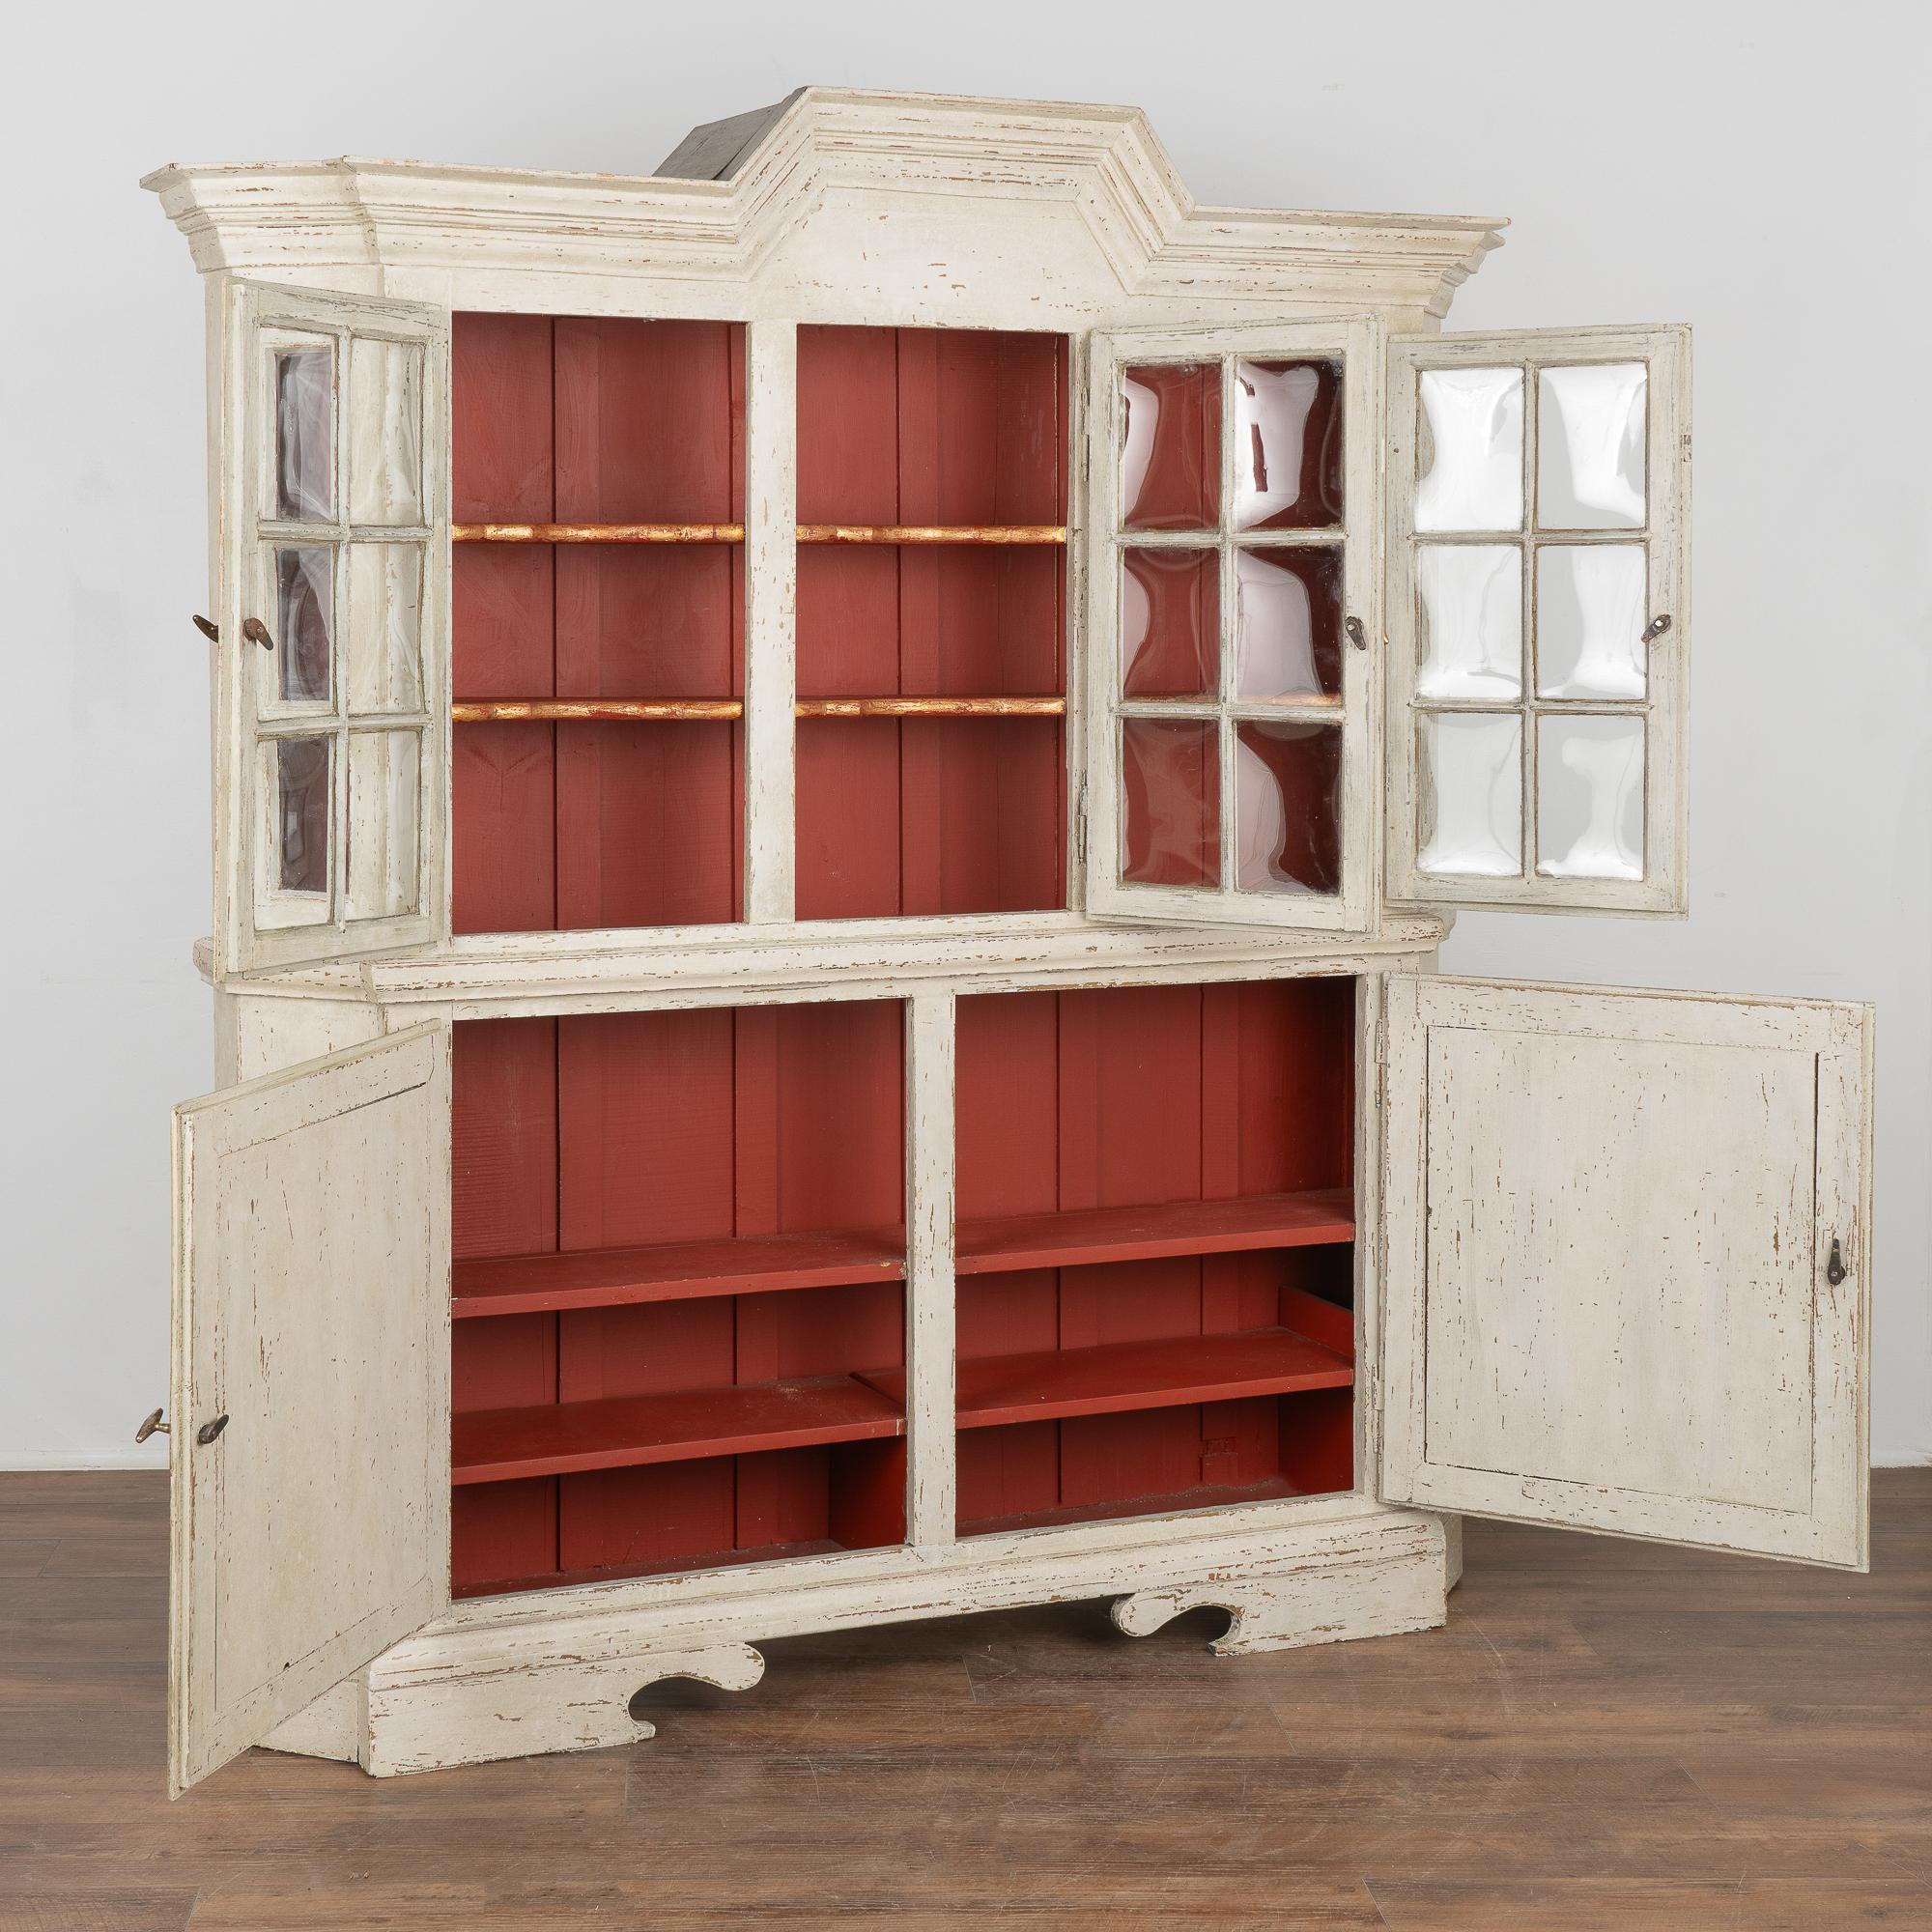 Country White Display Cabinet Cupboard with Pane Glass Doors, Sweden circa 1860-80 For Sale